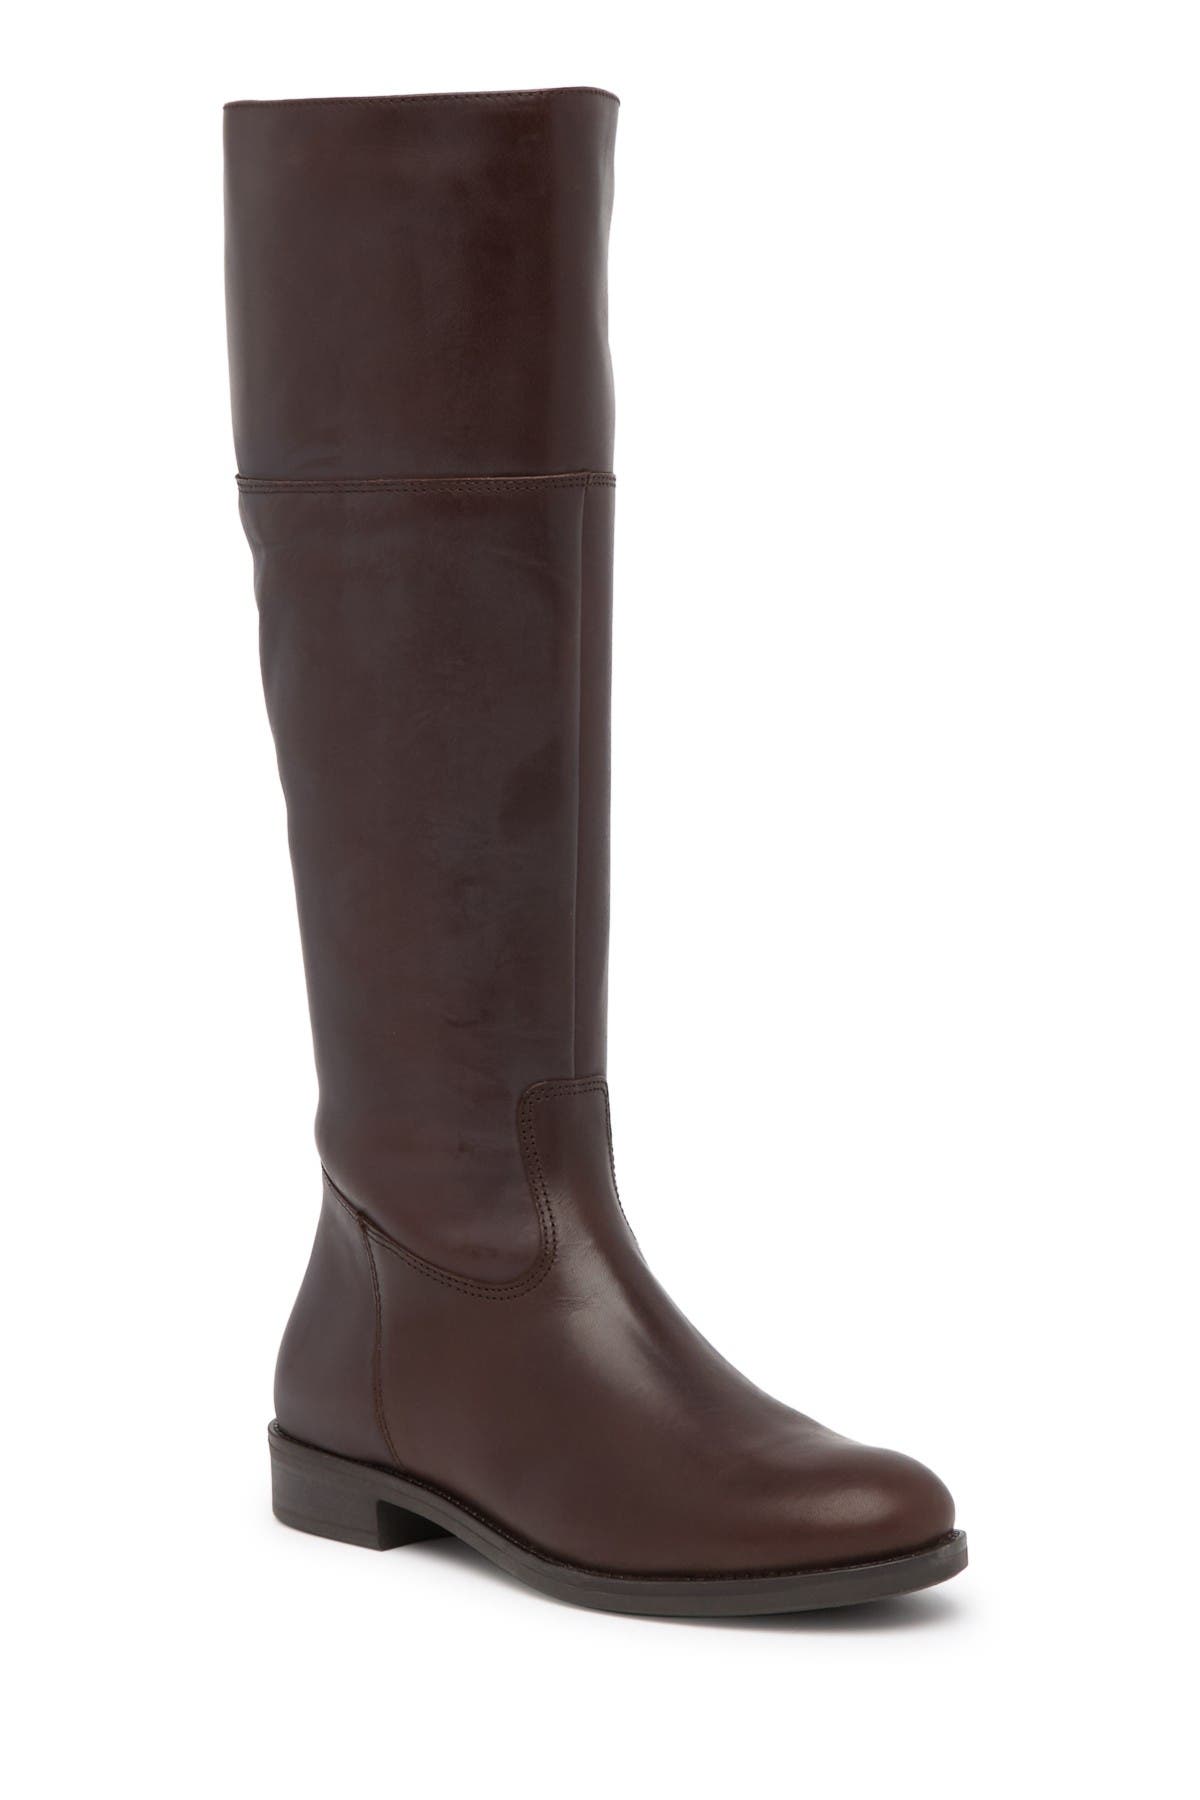 nordstrom rack leather boots